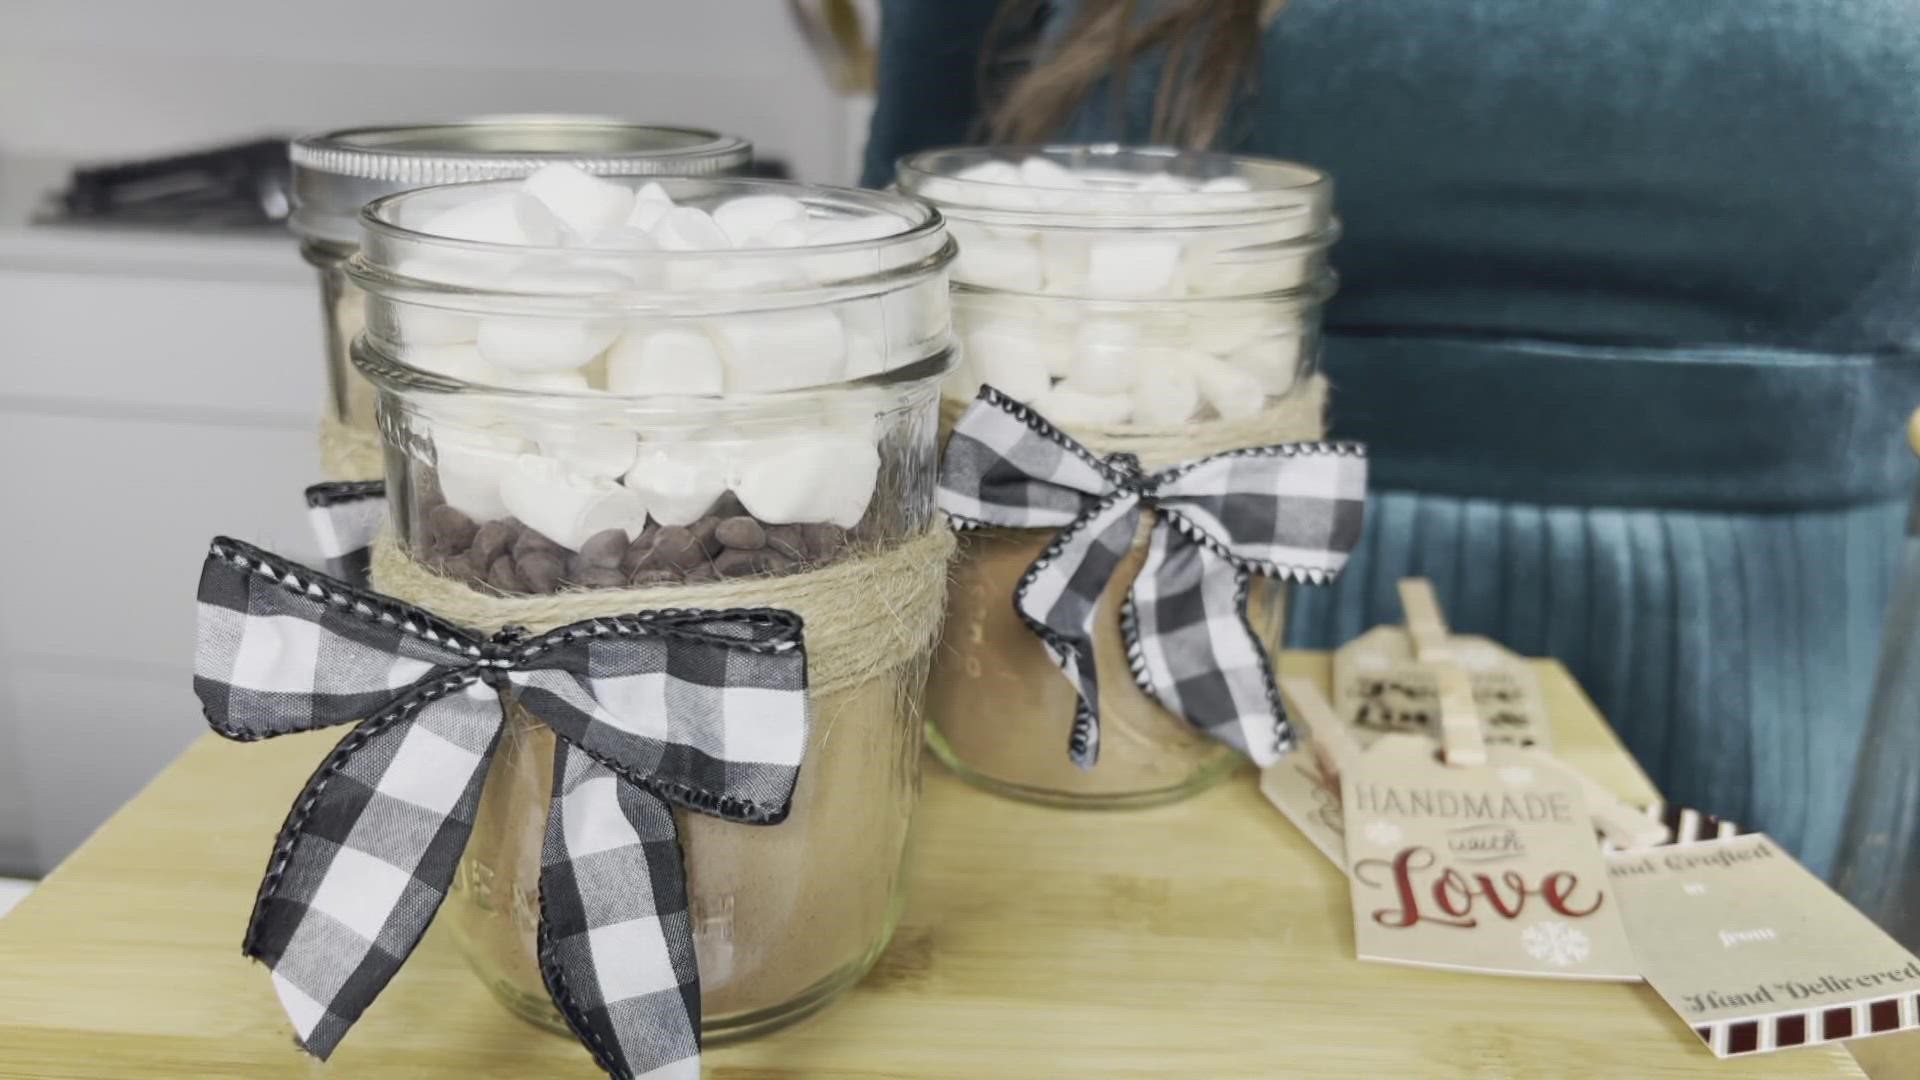 If you like a DIY Gift then you'll want to make this Homemade Hot Chocolate Mix in a jar.